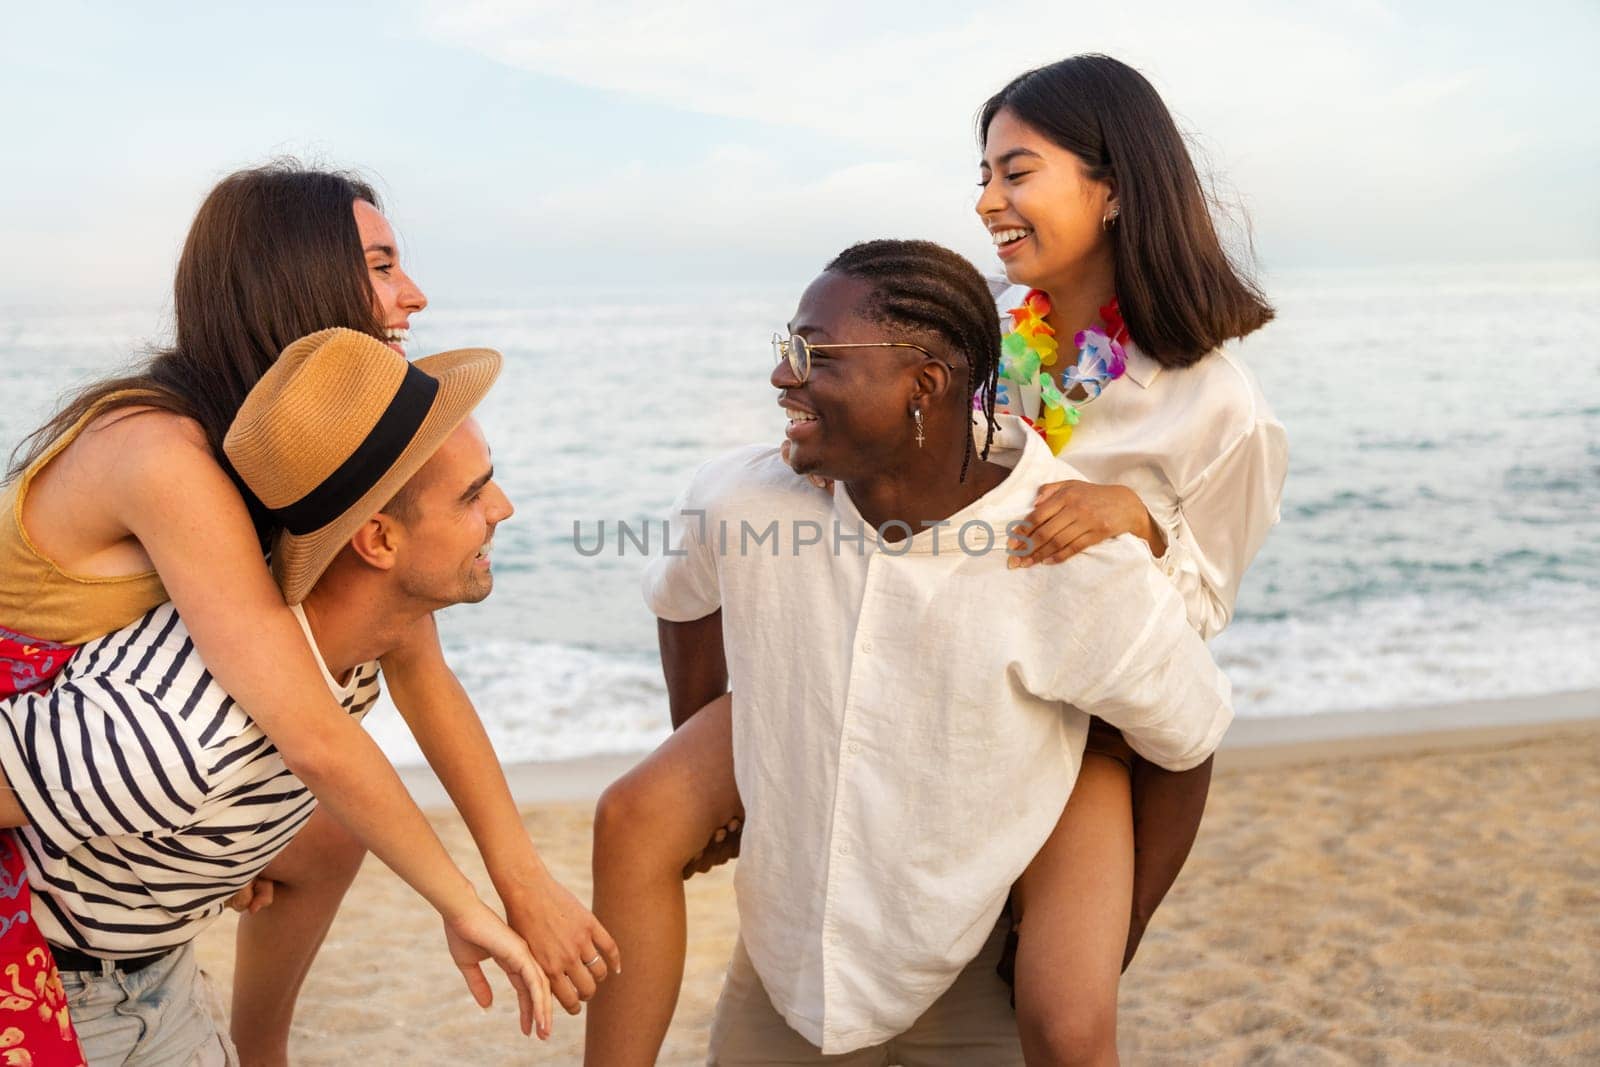 Happiness and friendship. Young multiracial friends having fun outdoors in the beach near ocean. Piggy back ride. Lifestyle concept.